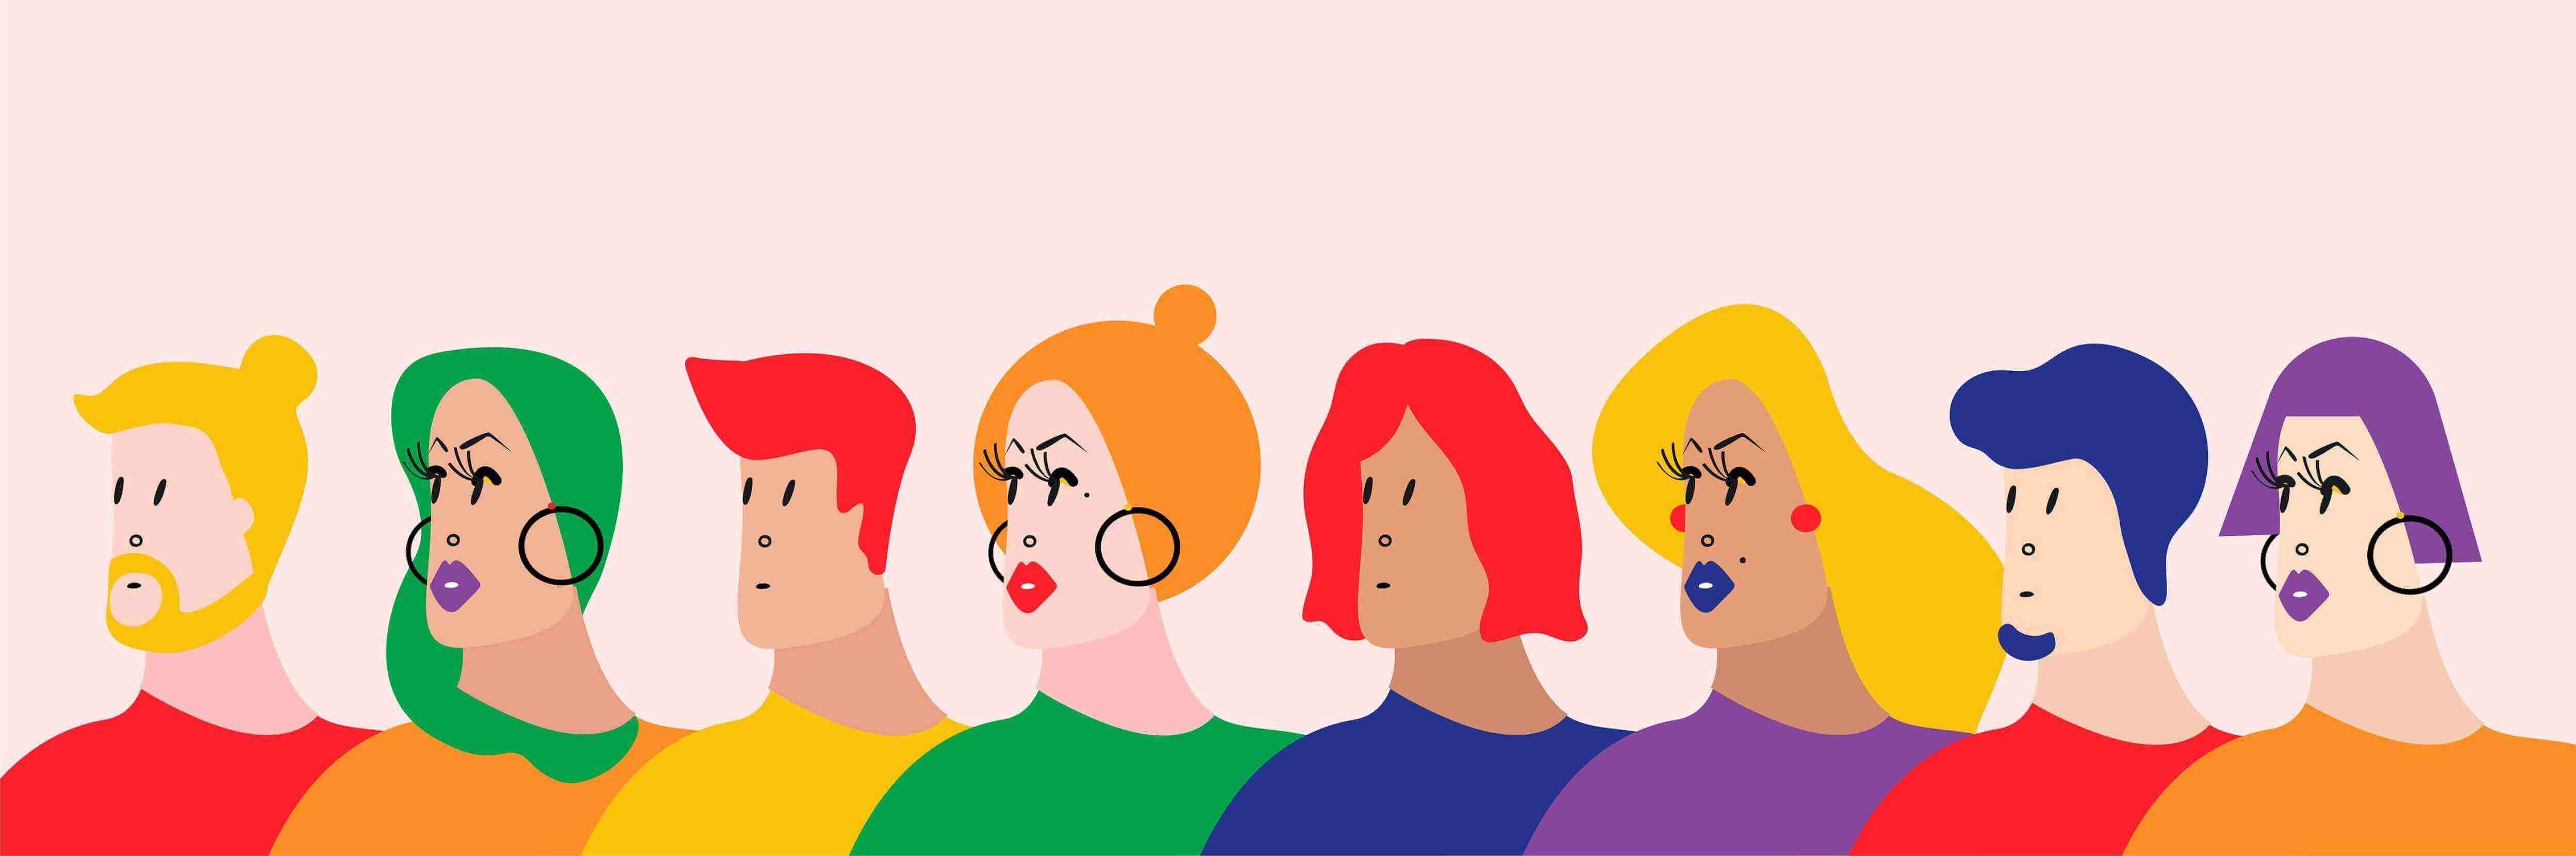 Stylised illustration of a group of people of various genders